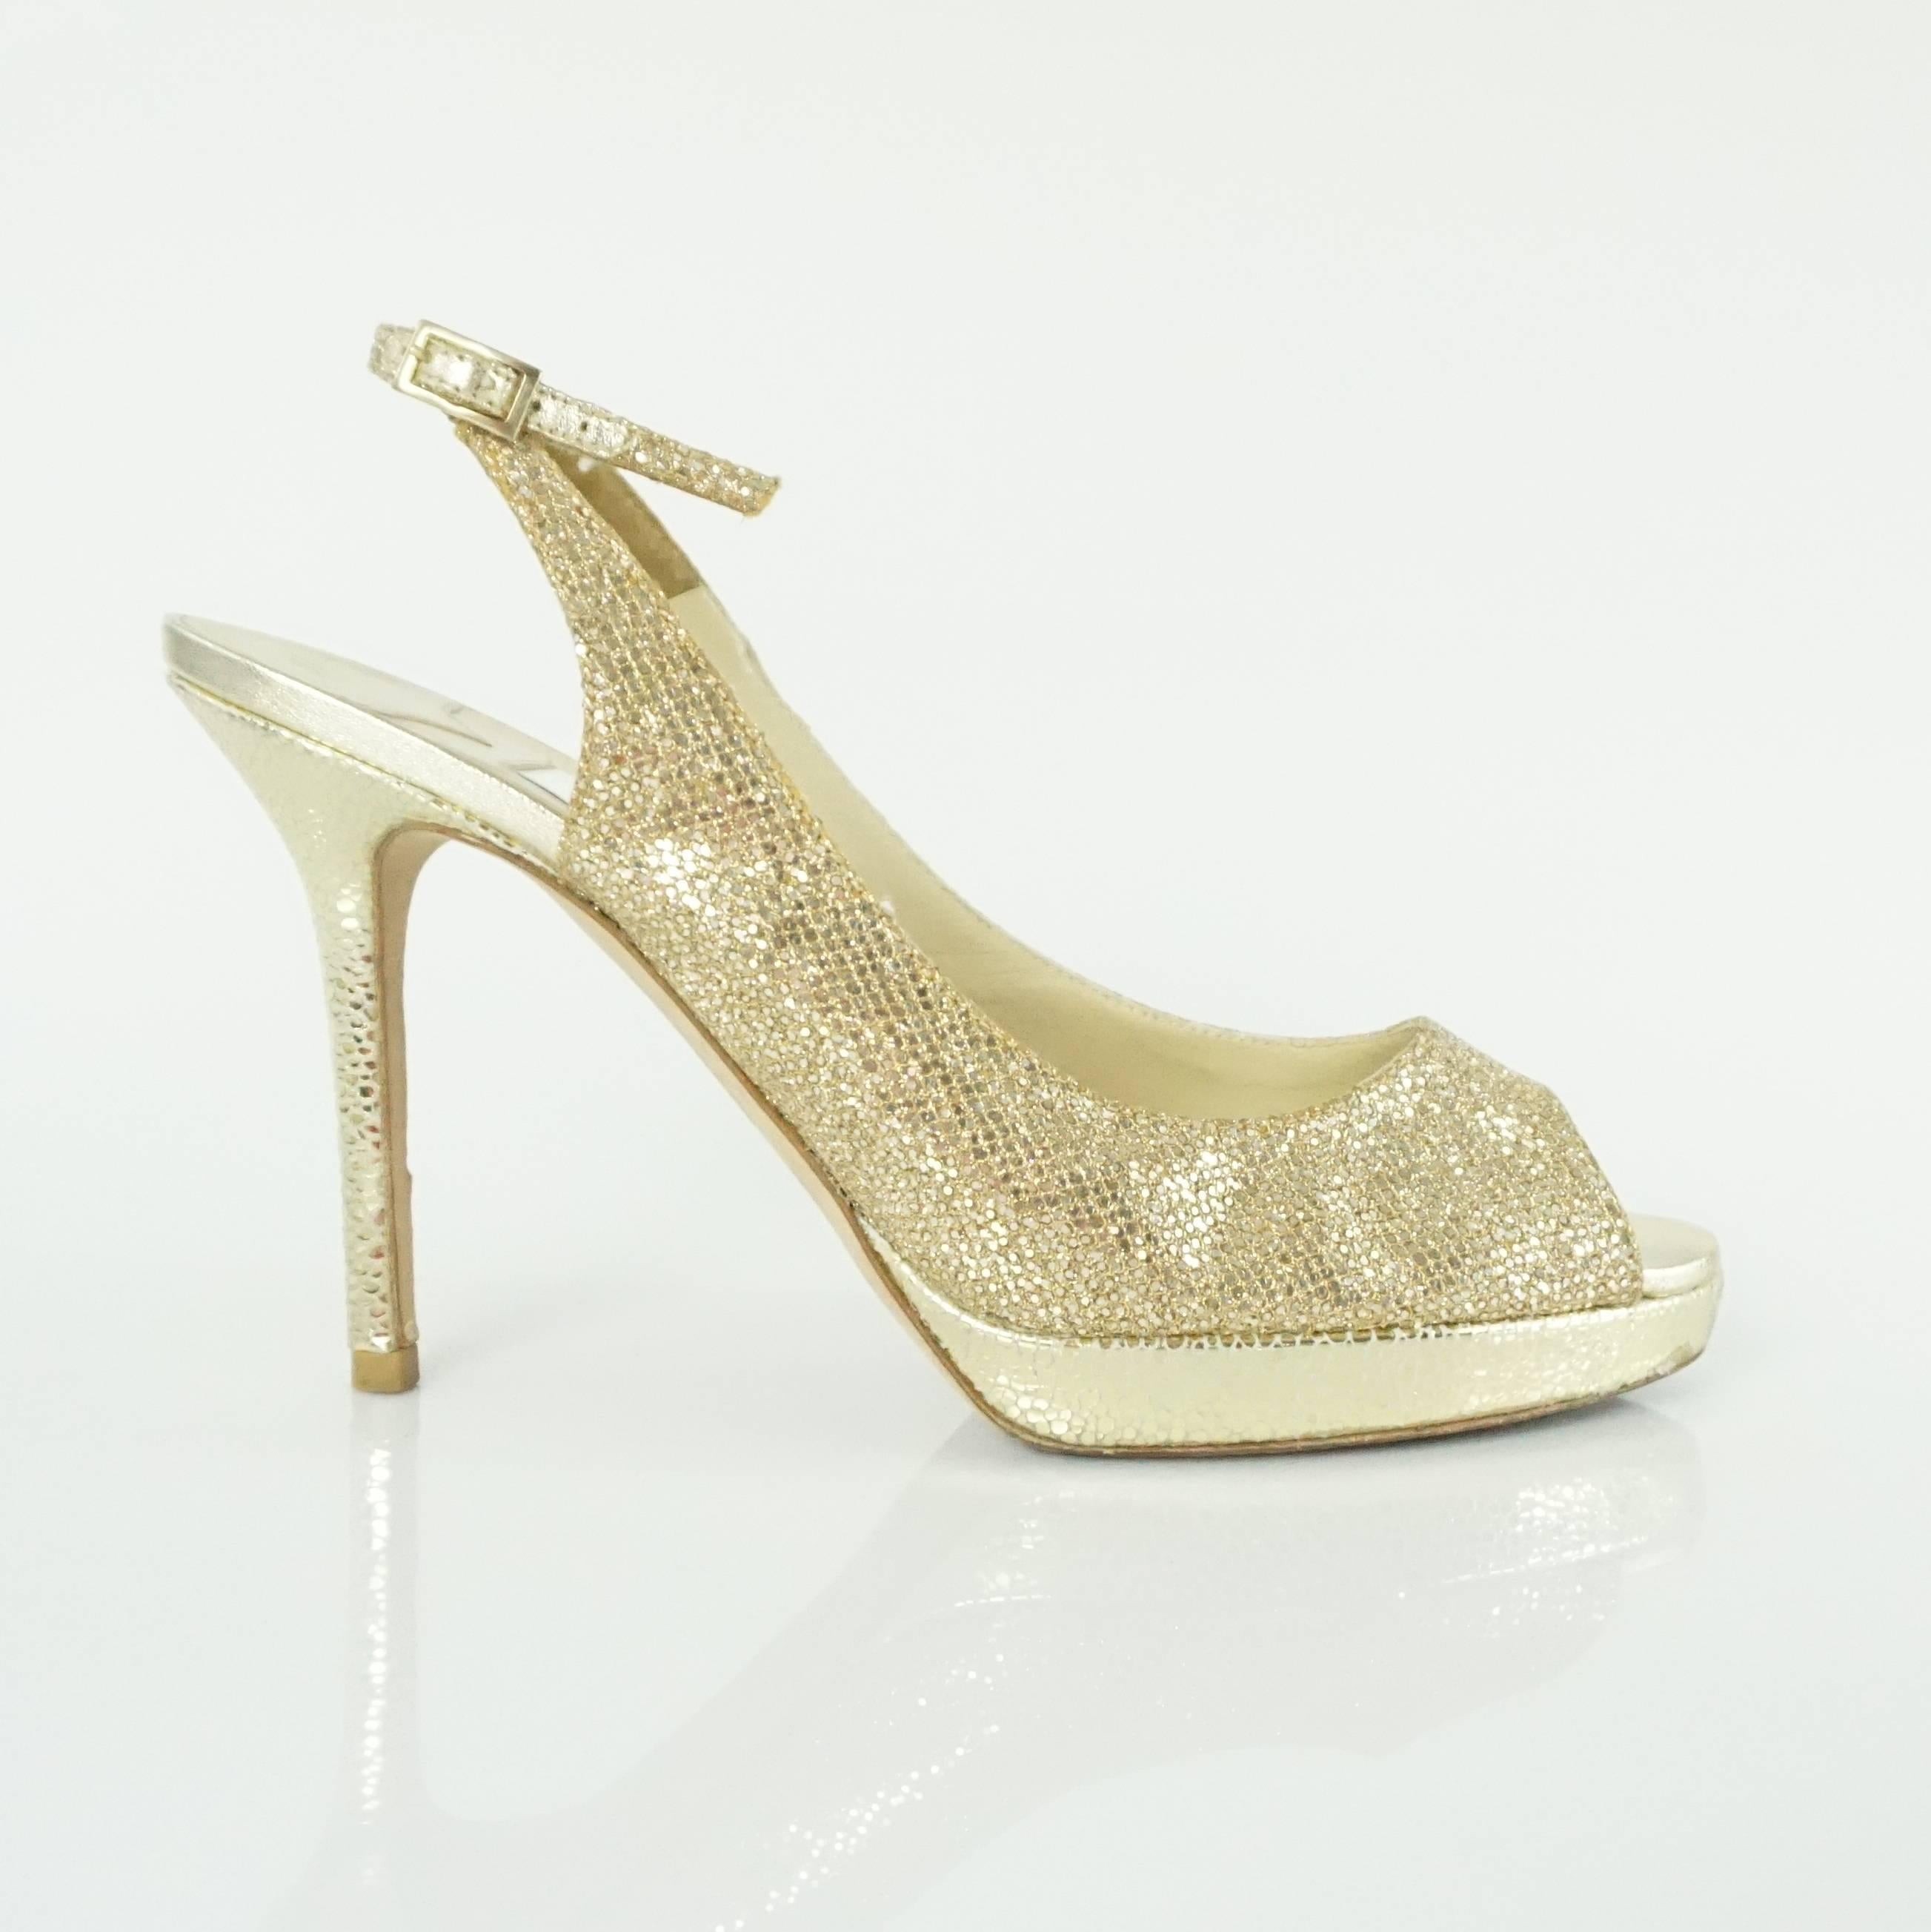 These Jimmy Choo gold glitter slingbacks are a truly glam pair of shoes. They feature a peep toe, gold glitter body, cracked gold leather trim, and adjustable slingback strap. They are in very good condition with some wear to the back and slights